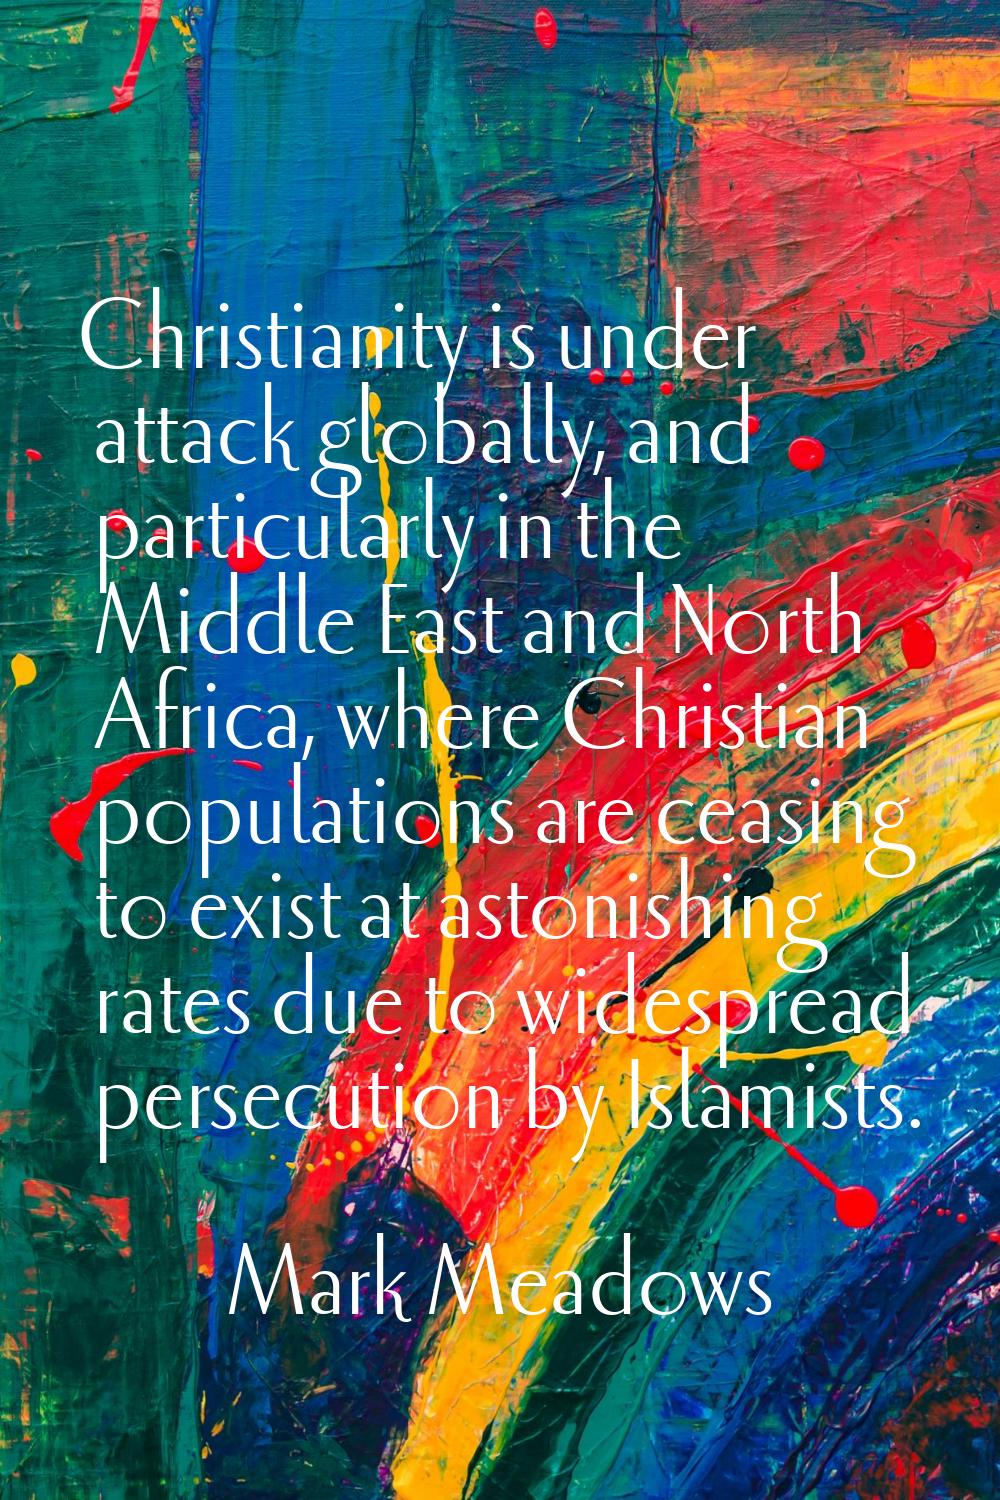 Christianity is under attack globally, and particularly in the Middle East and North Africa, where 